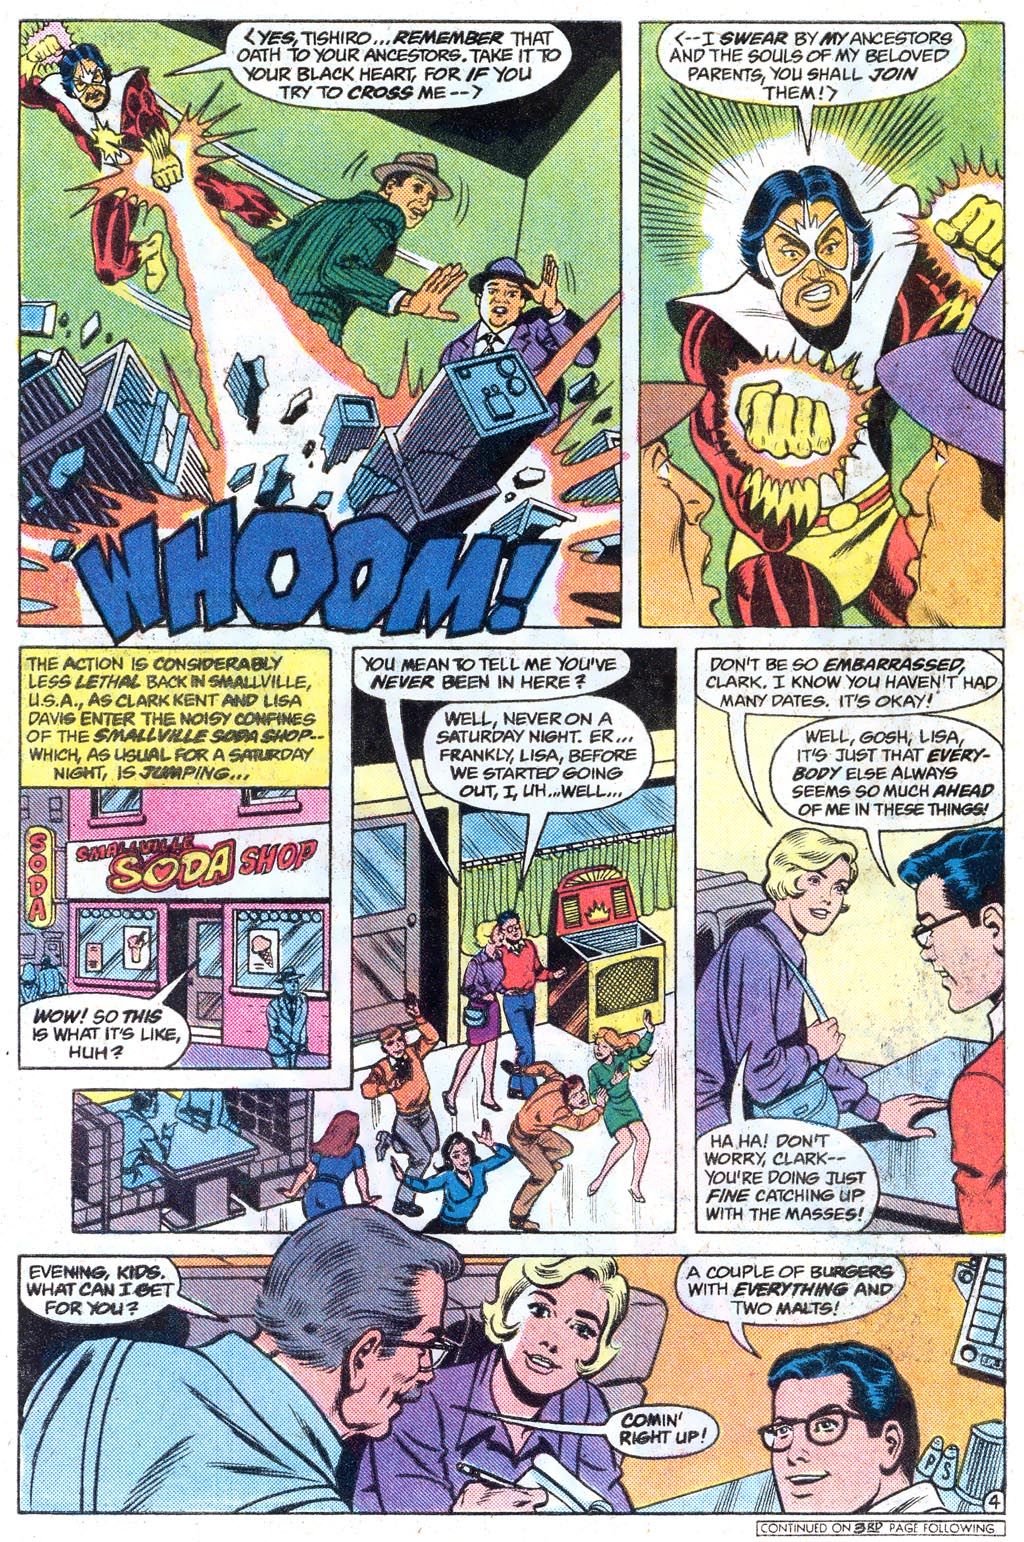 The New Adventures of Superboy 45 Page 5